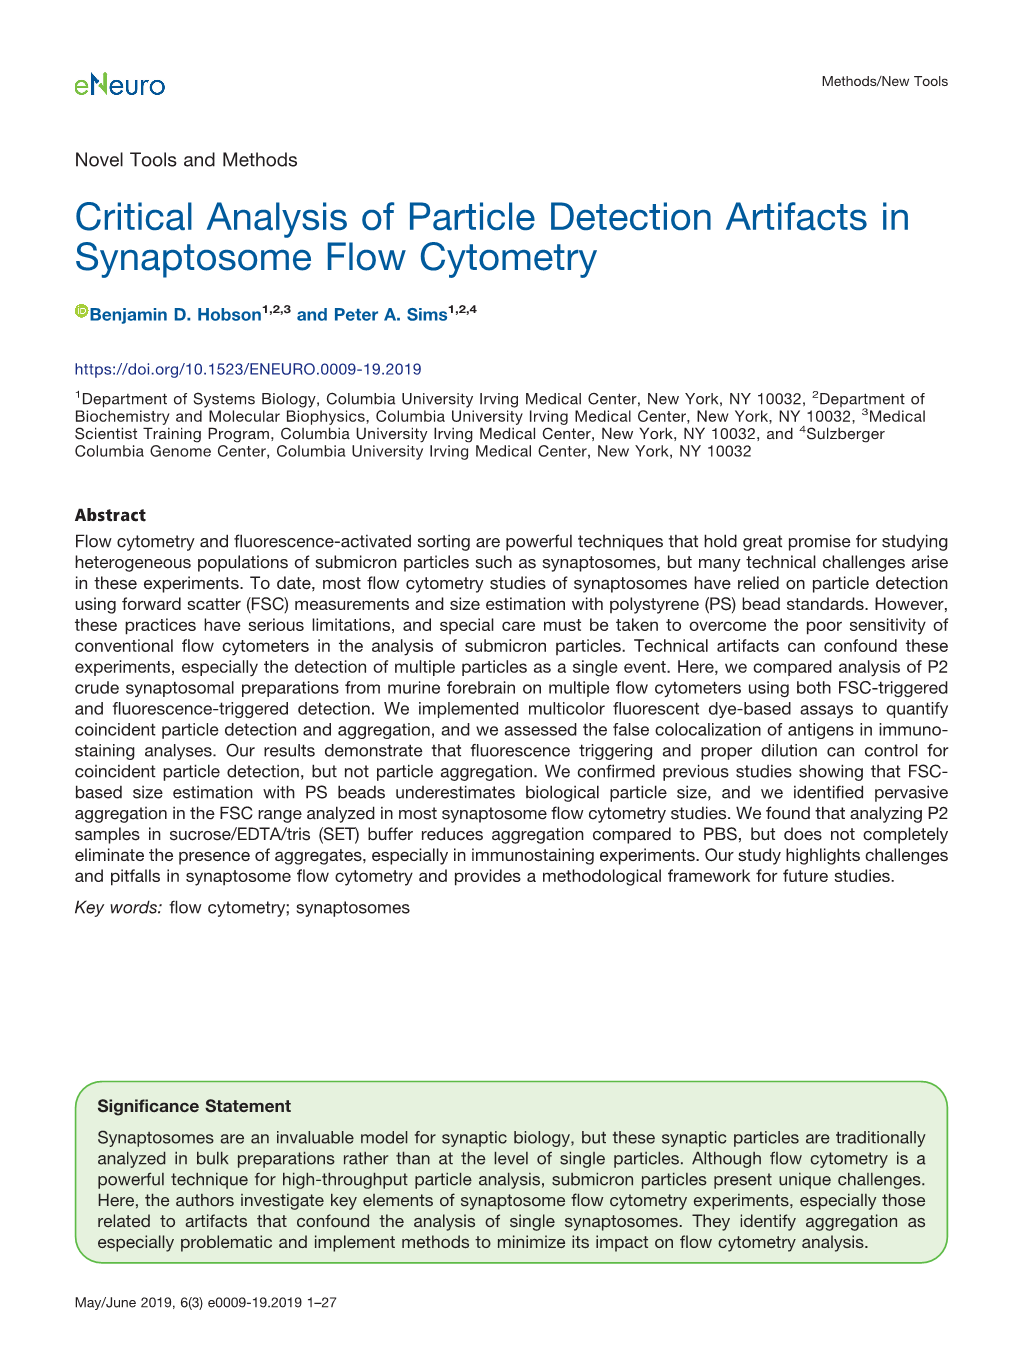 Critical Analysis of Particle Detection Artifacts in Synaptosome Flow Cytometry